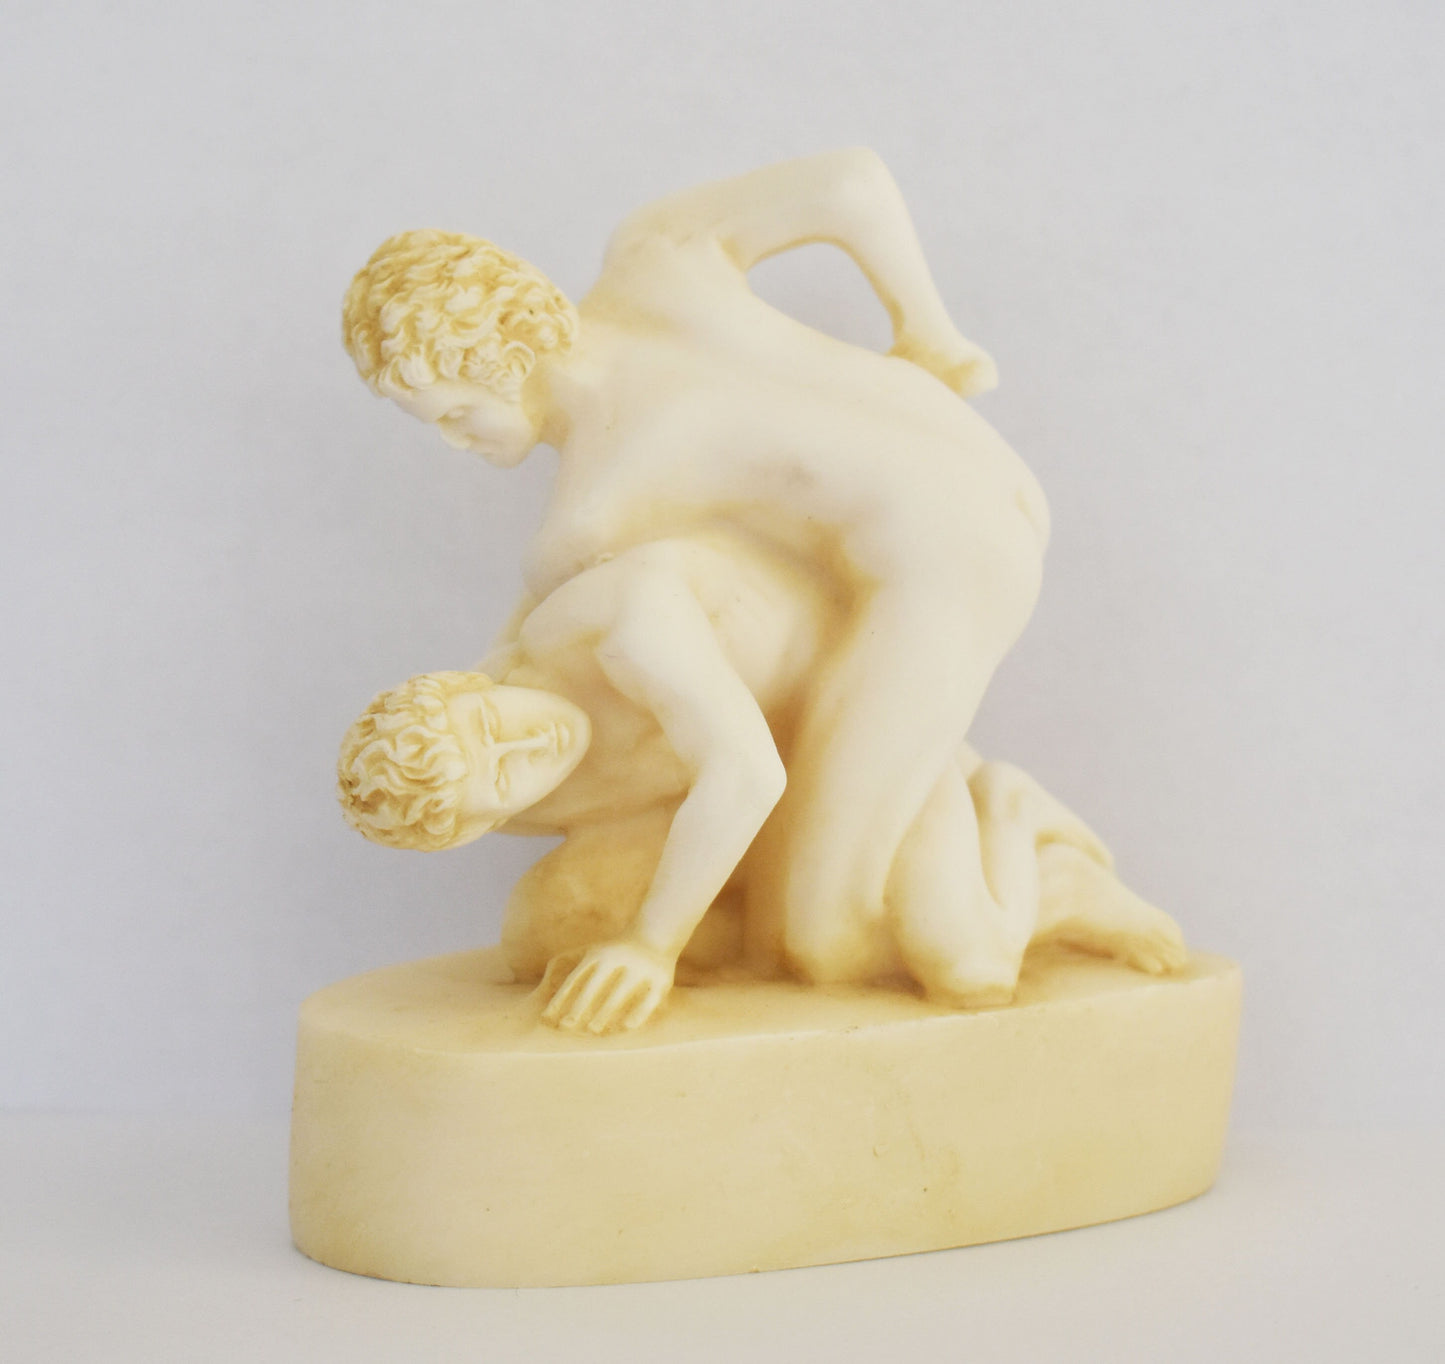 Pankration Athletes - Ancient Combat Sport - Wrestling and Boxing techniques - Olympic Games - Alabaster Aged sculpture